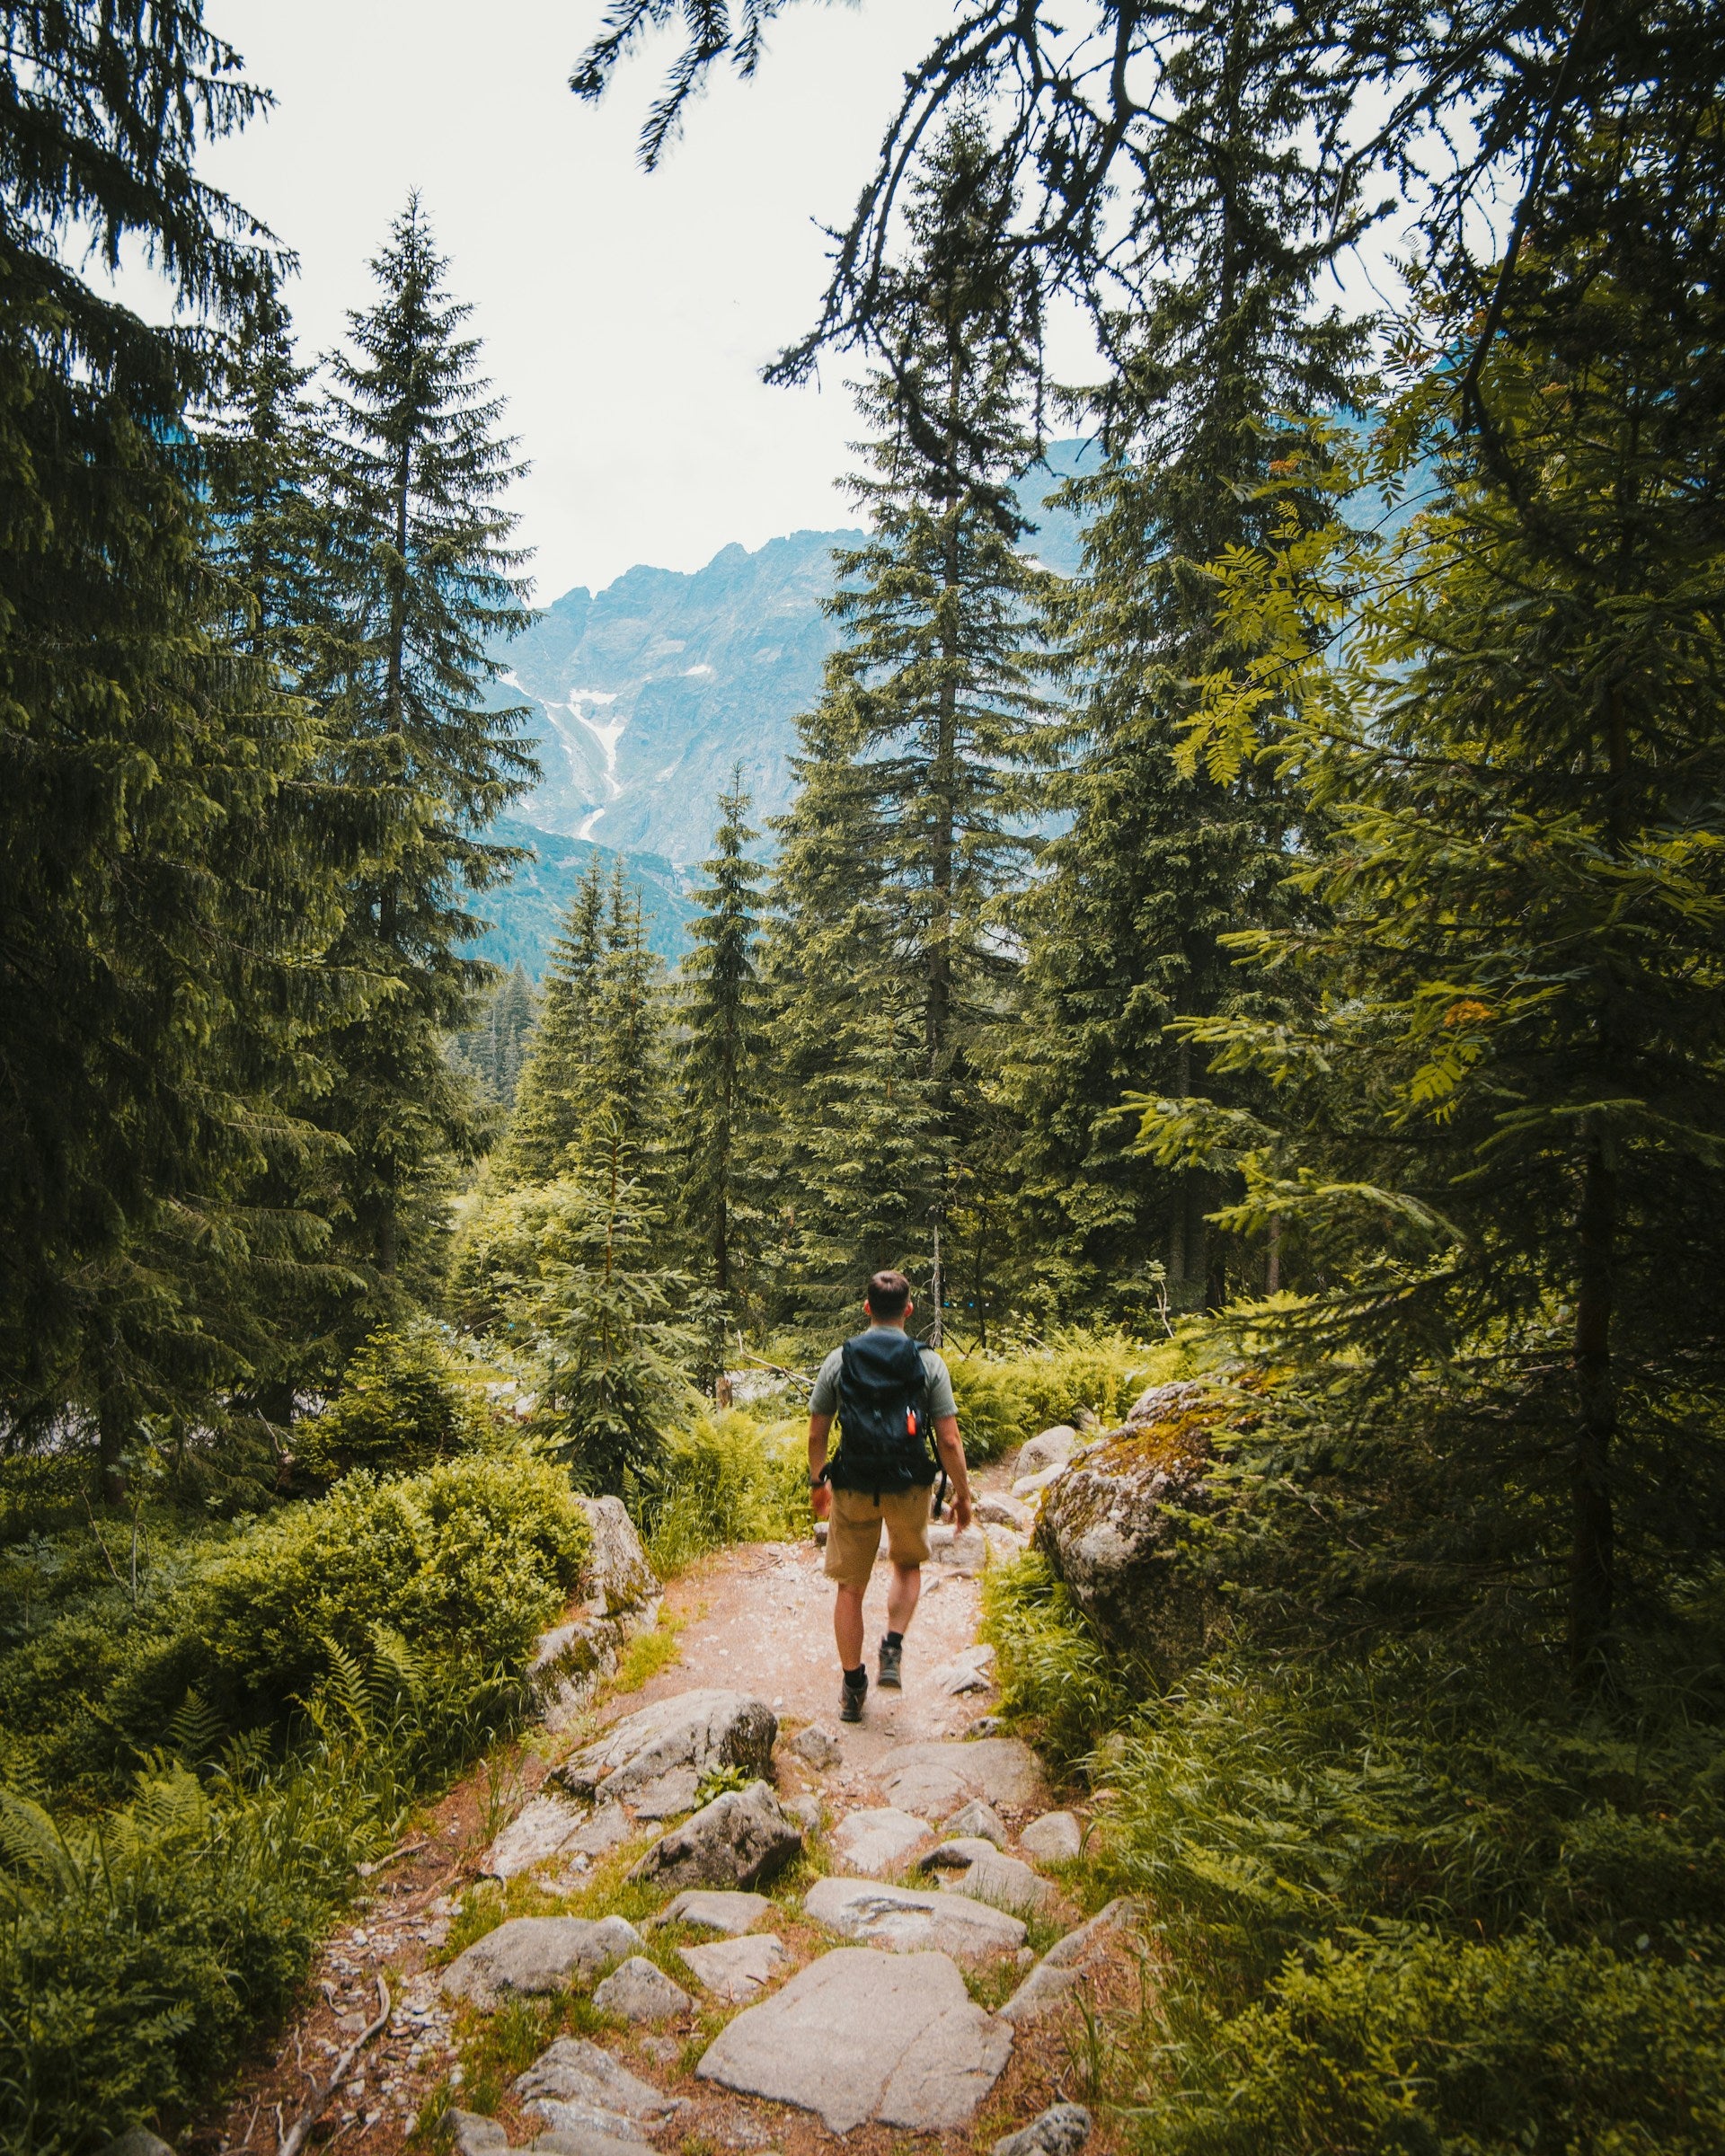 Man hiking on a trail through a beautiful forest